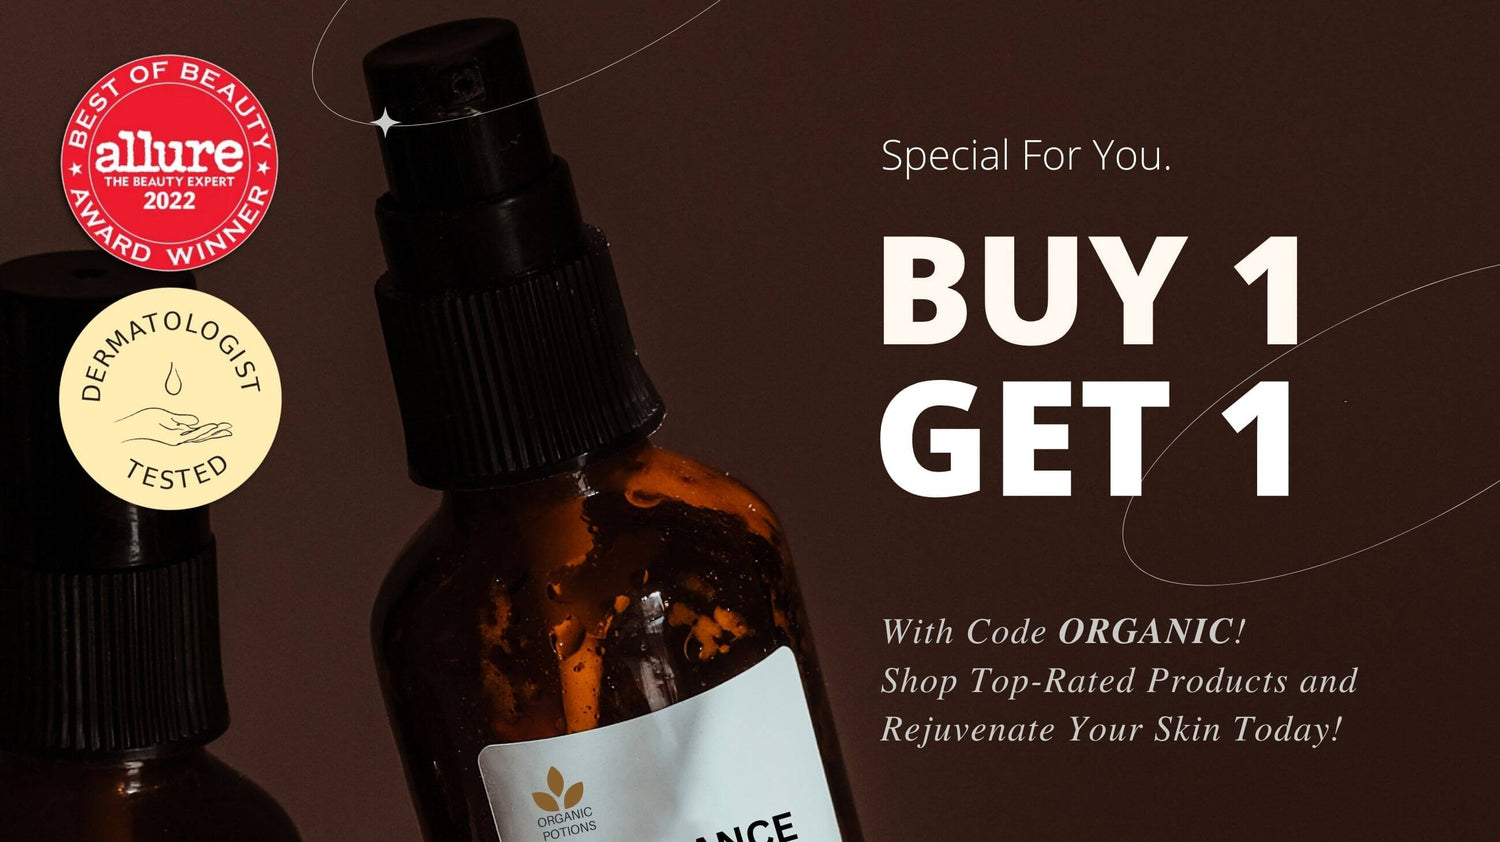 Big Deal for limited time only: Buy 1 Organic Potions skin care products, Get 1 Free